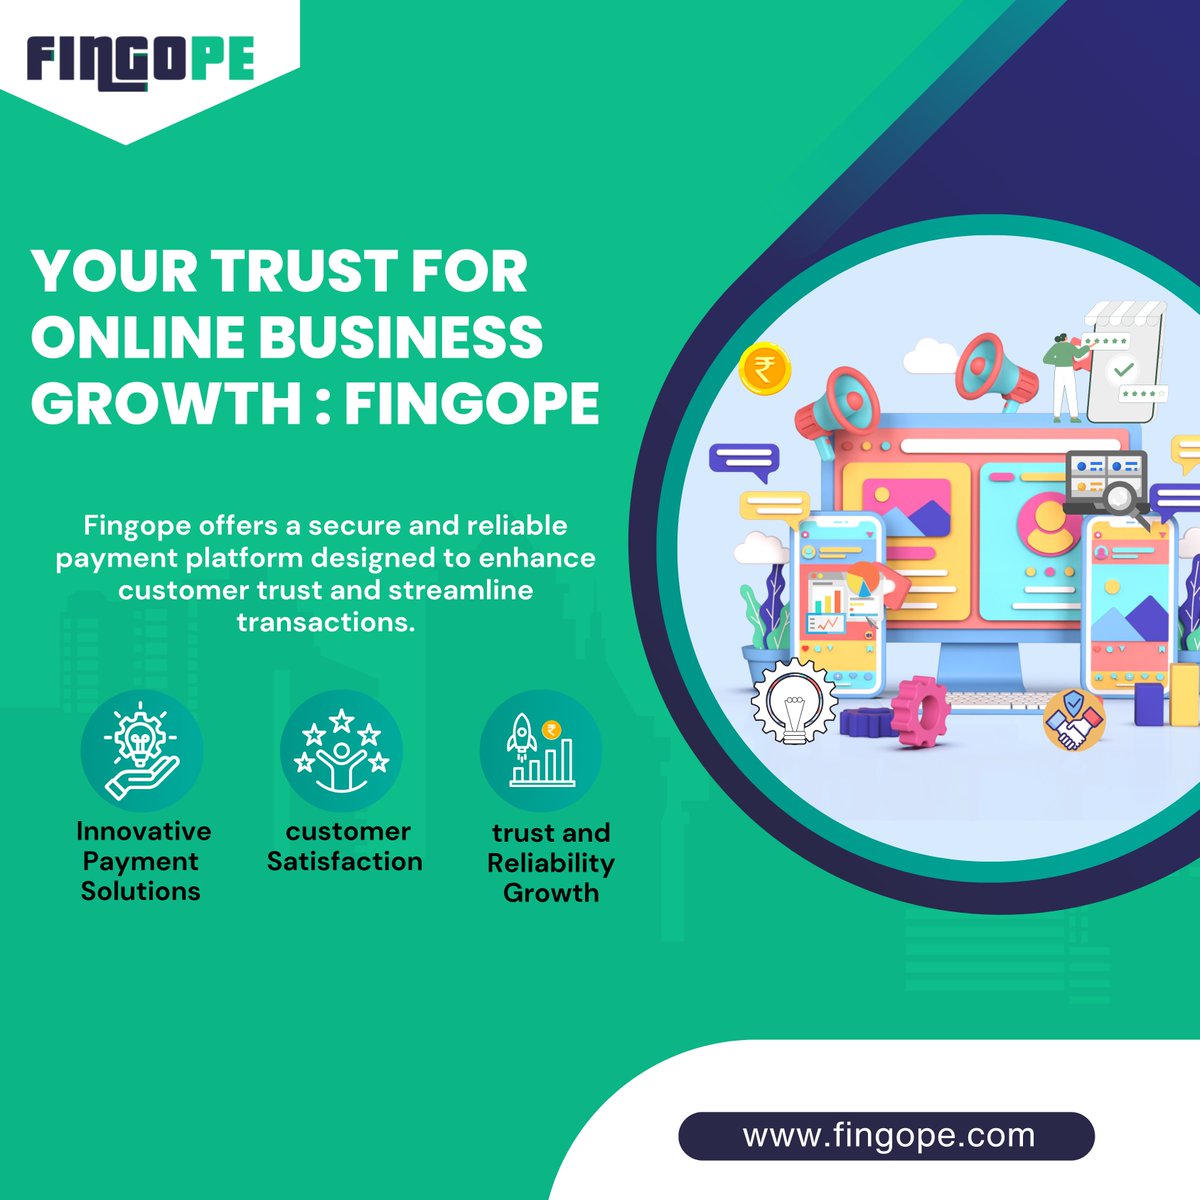 Boost Your Online Business to New Heights: Trust Fingope for Secure, Efficient, and Easy Financial Operations.
.
.
.
#GrowWithFingope #TrustedBusinessPartner #FingopeForGrowth #fingope #onlinebusinesses #paymentgateway #onlinepayments #payments #paymentprocessing